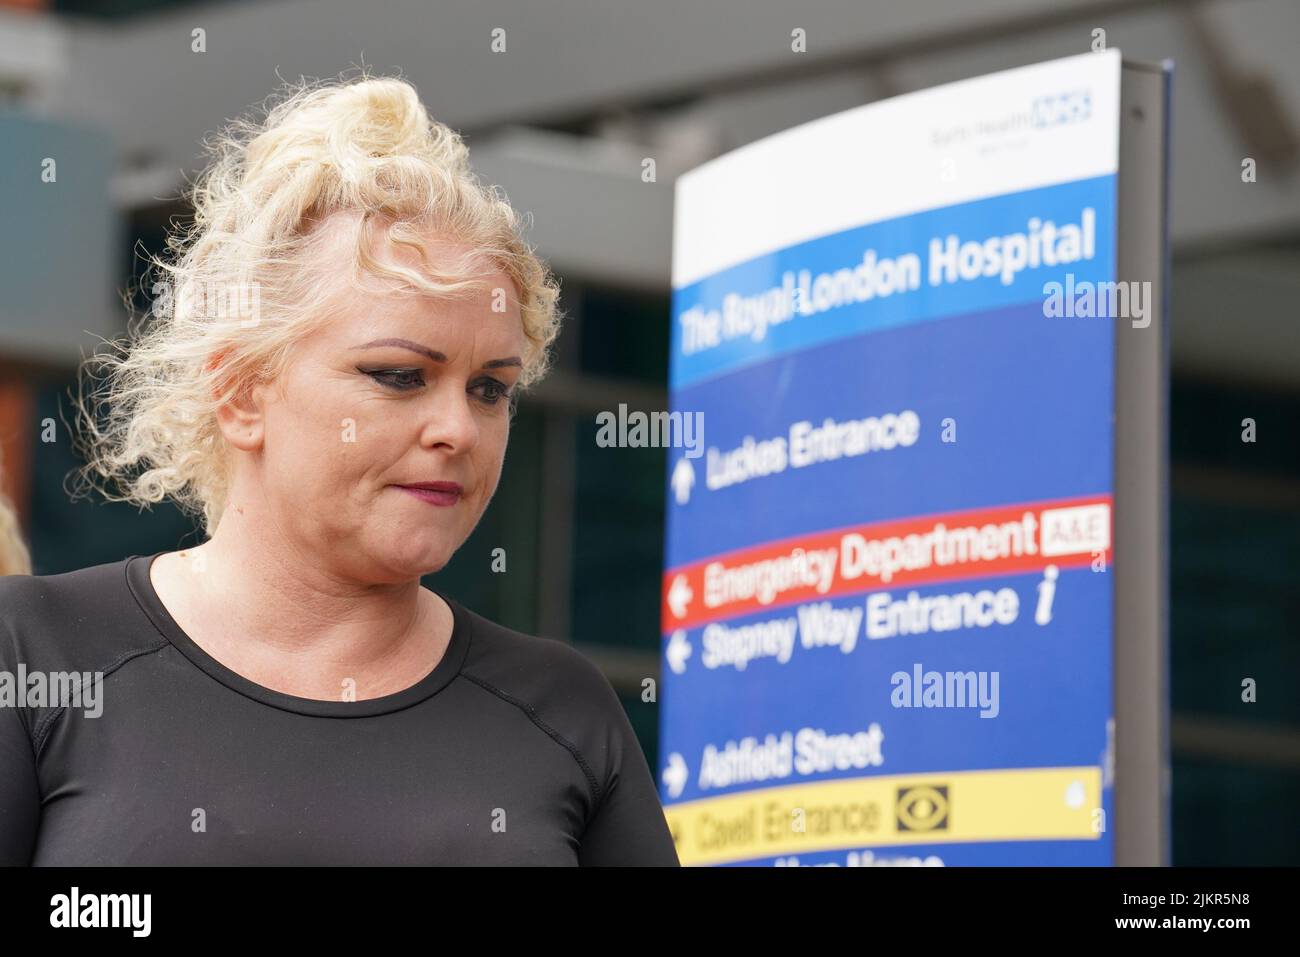 The mother of Archie Battersbee, Hollie Dance, speaks to the media outside the Royal London hospital in Whitechapel, east London. His parents have submitted an application to the European Court of Human Rights in a bid to postpone the withdrawal of his life support. Picture date: Wednesday August 3, 2022. Stock Photo